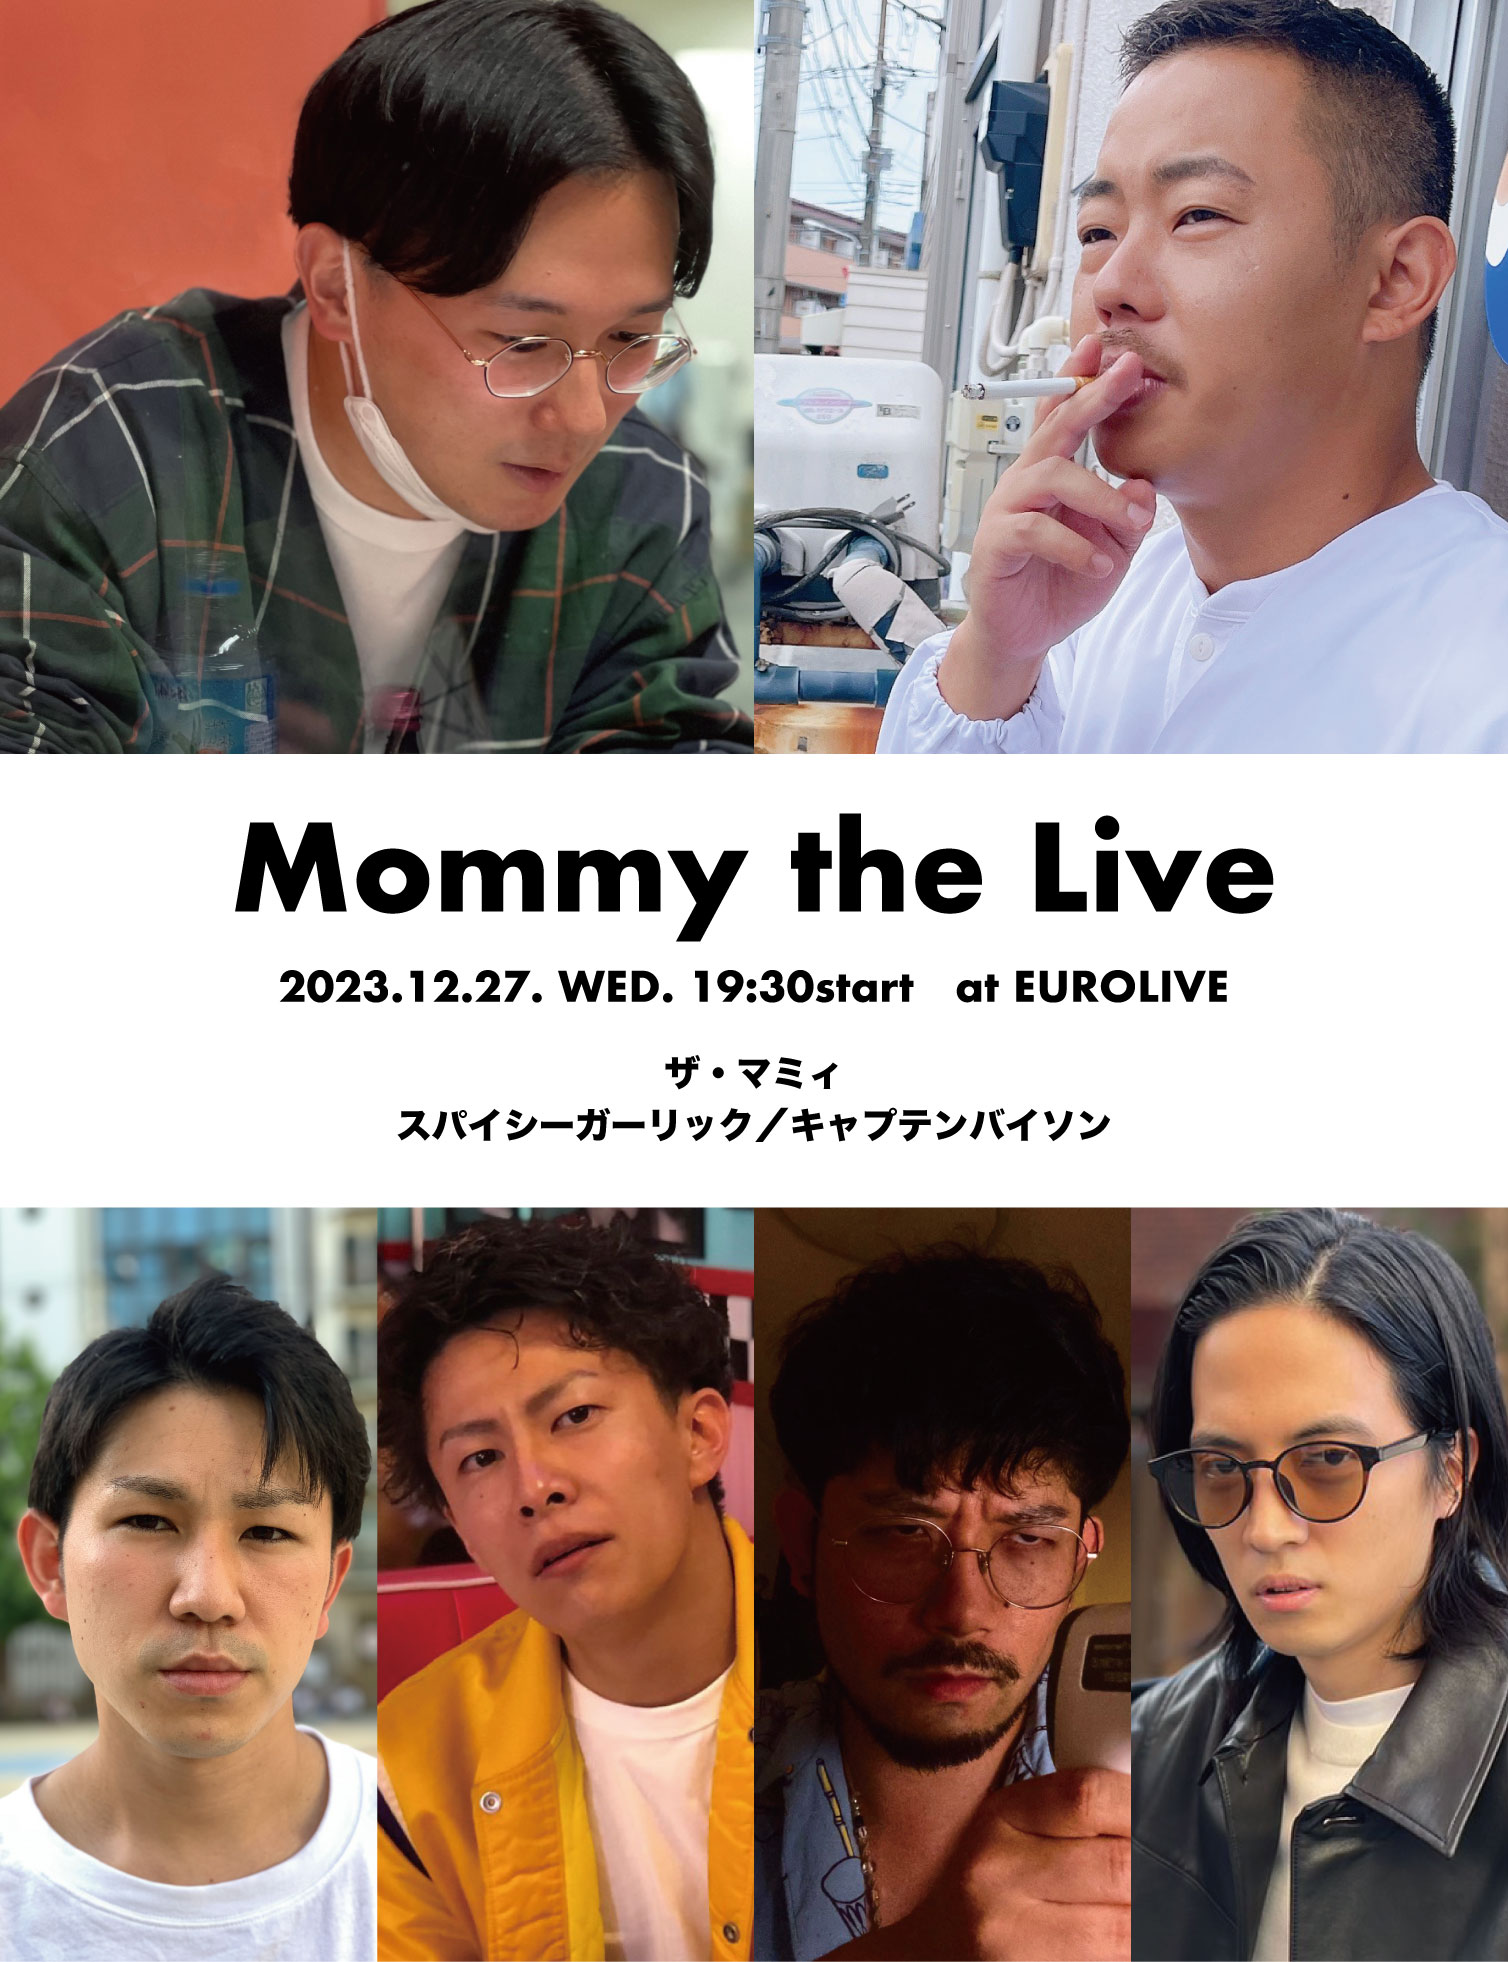 Mommy the Live